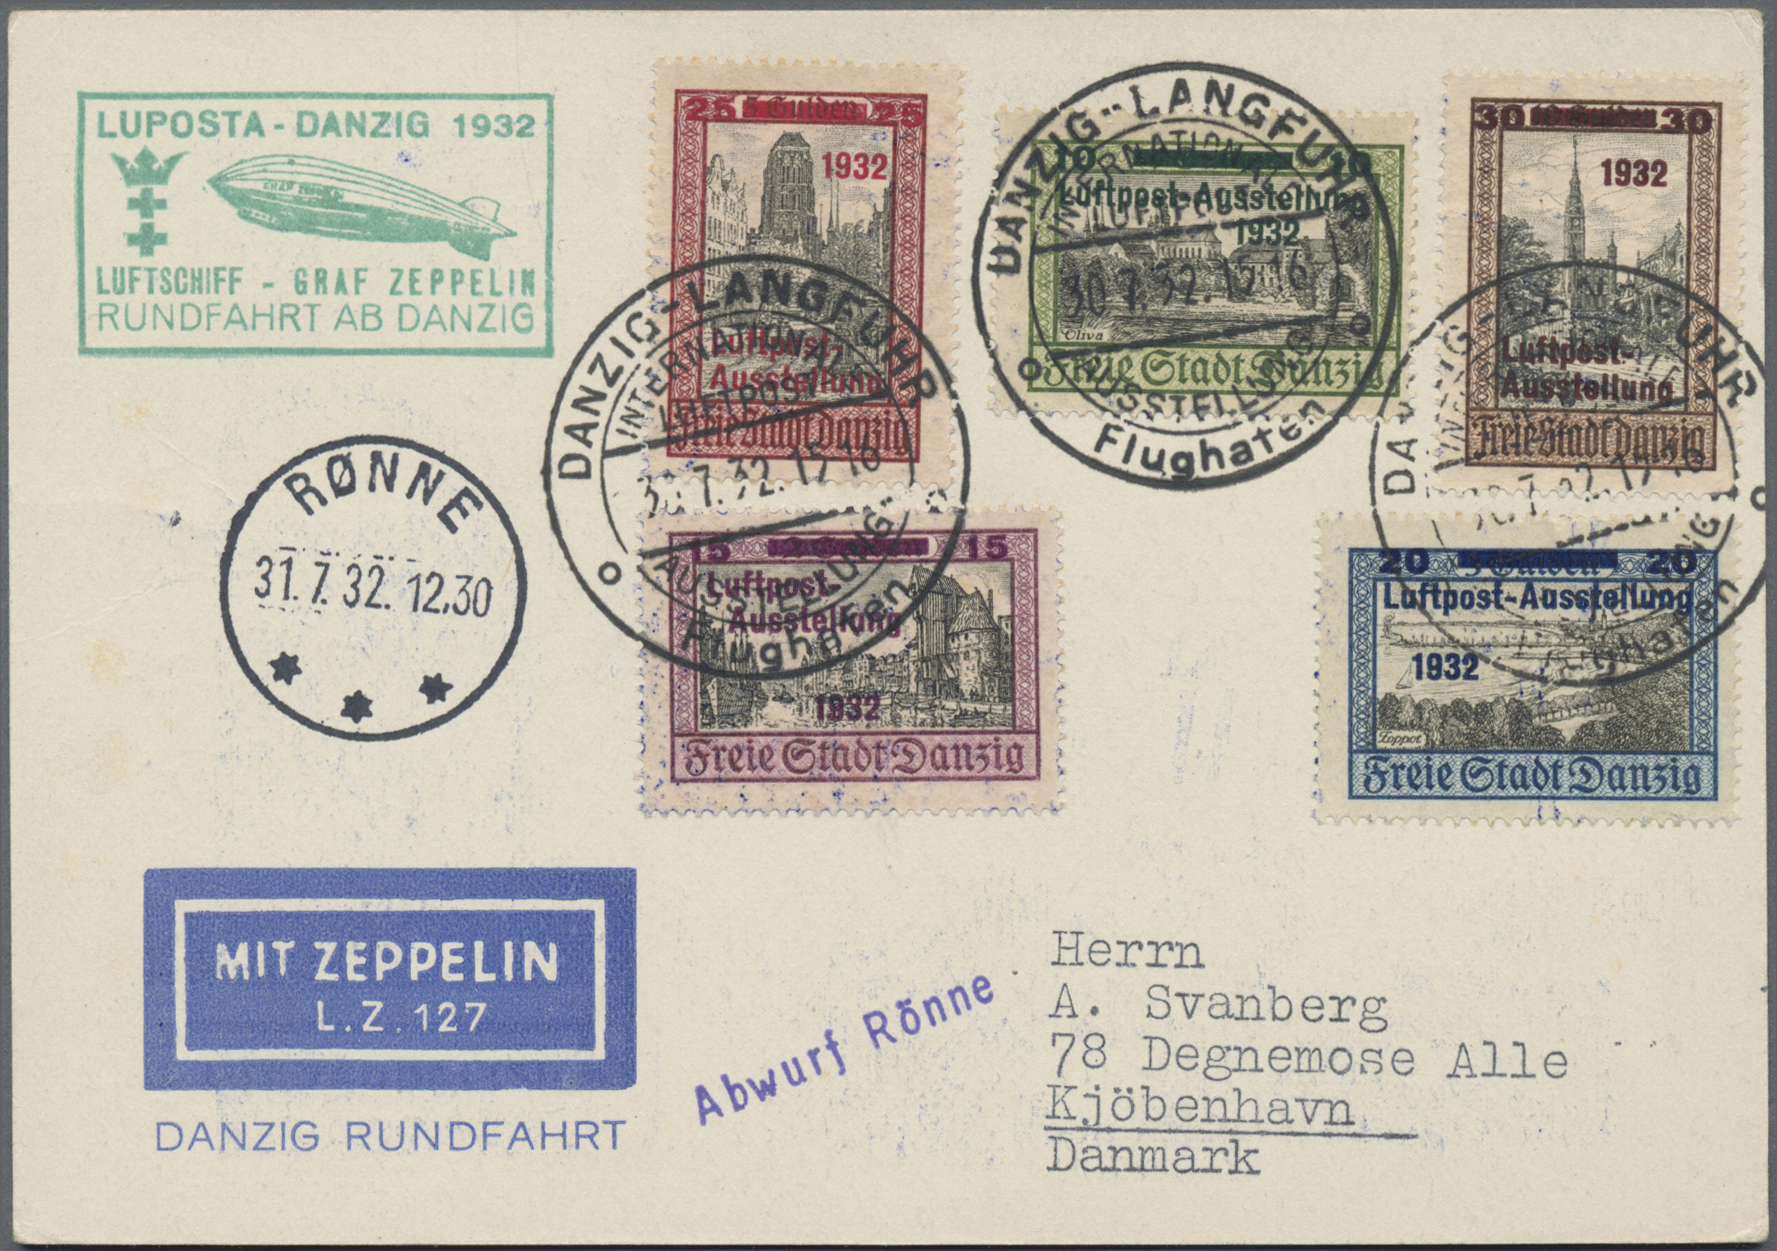 Stamp Auction - Danzig - Flugpost - Sale #46 Single lots Germany - and ...